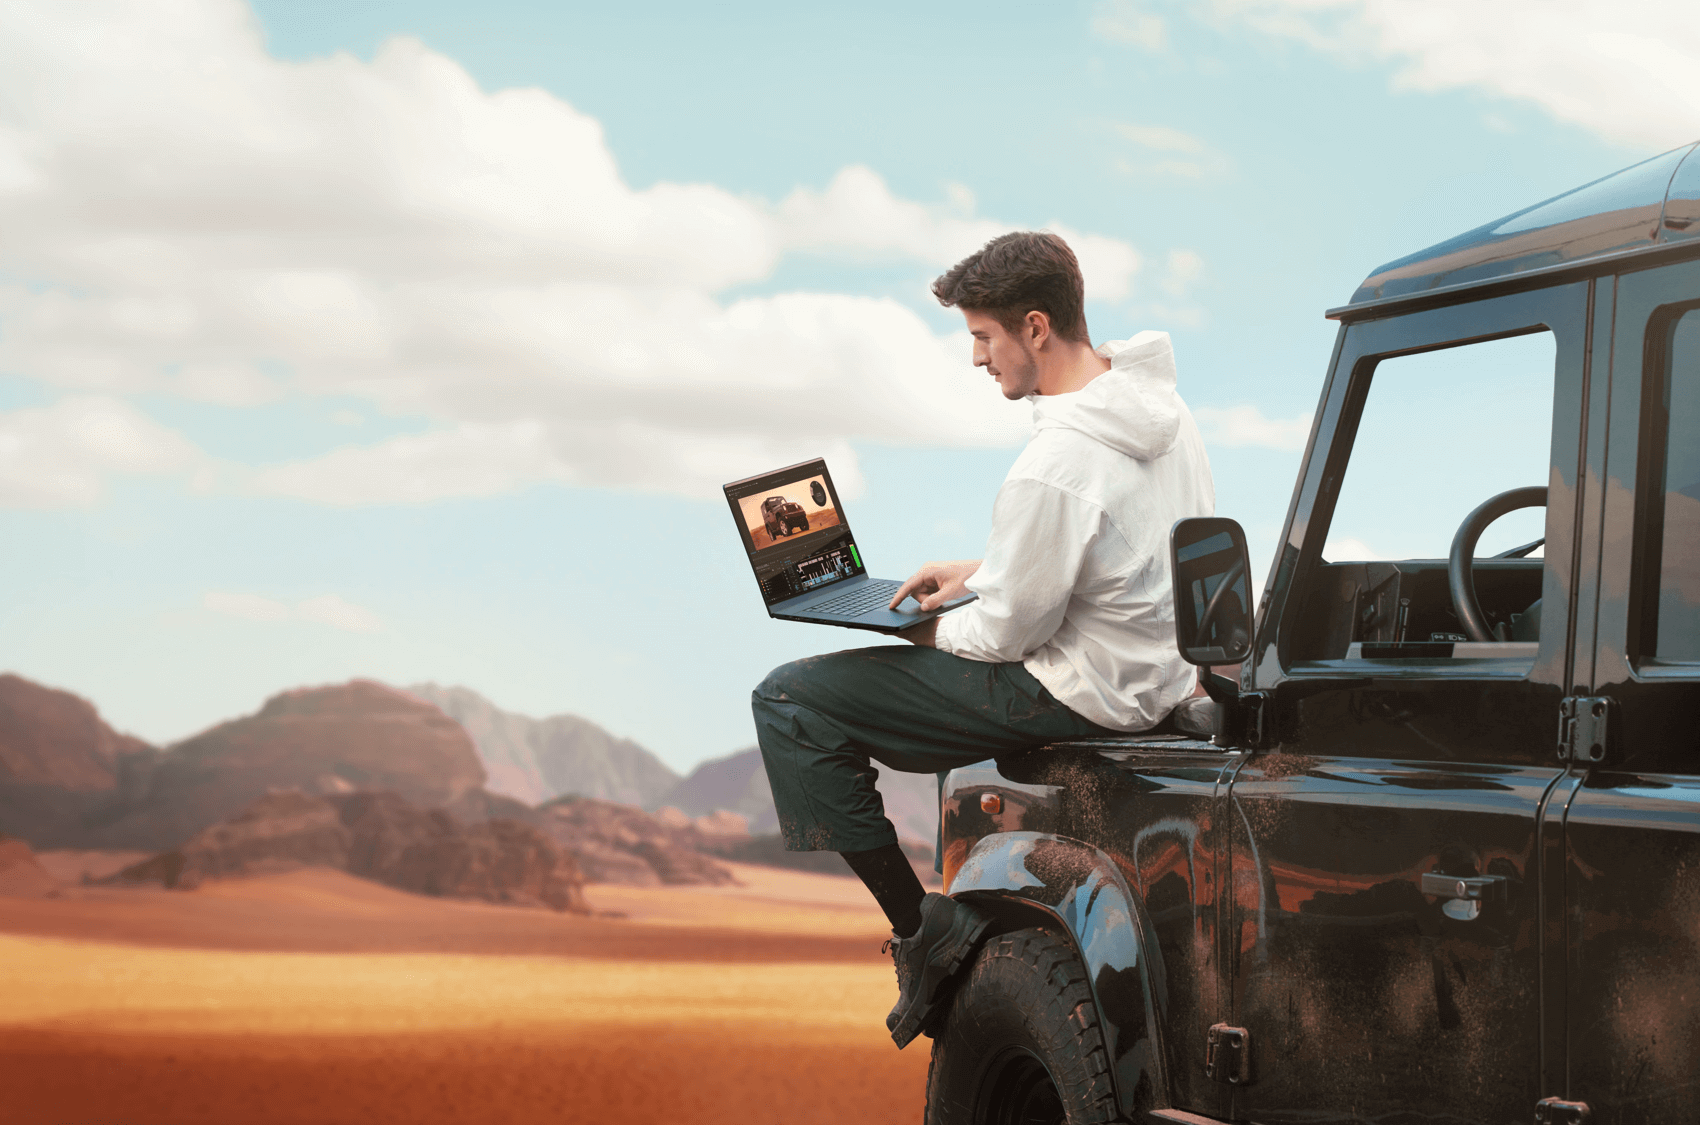 A man sitting on a truck using an ASUS laptop